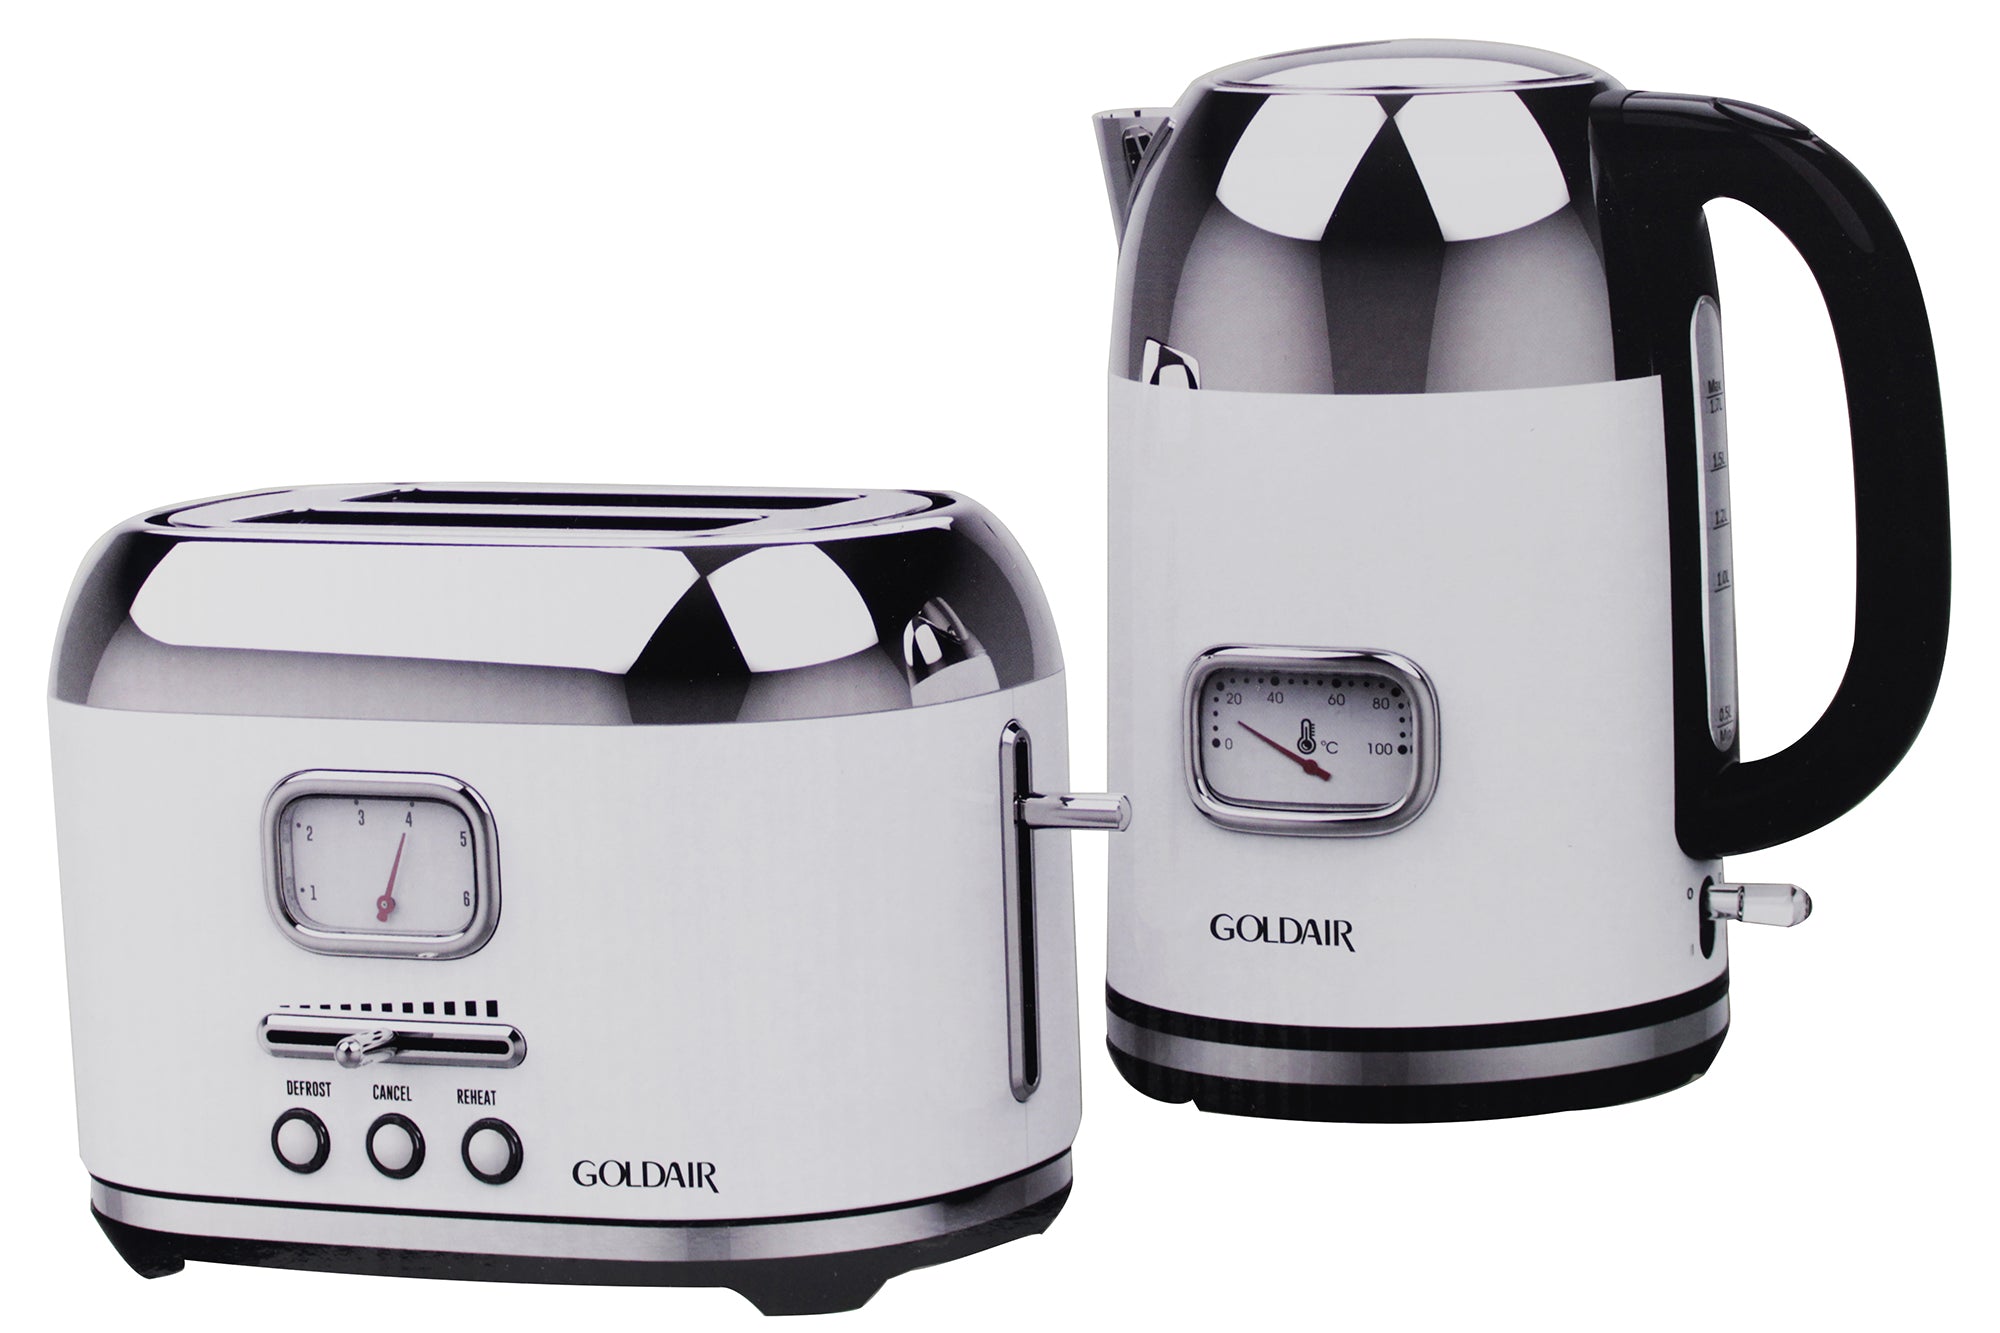 Goldair Retro Gauged 2 Slice Toaster & 1.7L Electric Kettle GRBS200